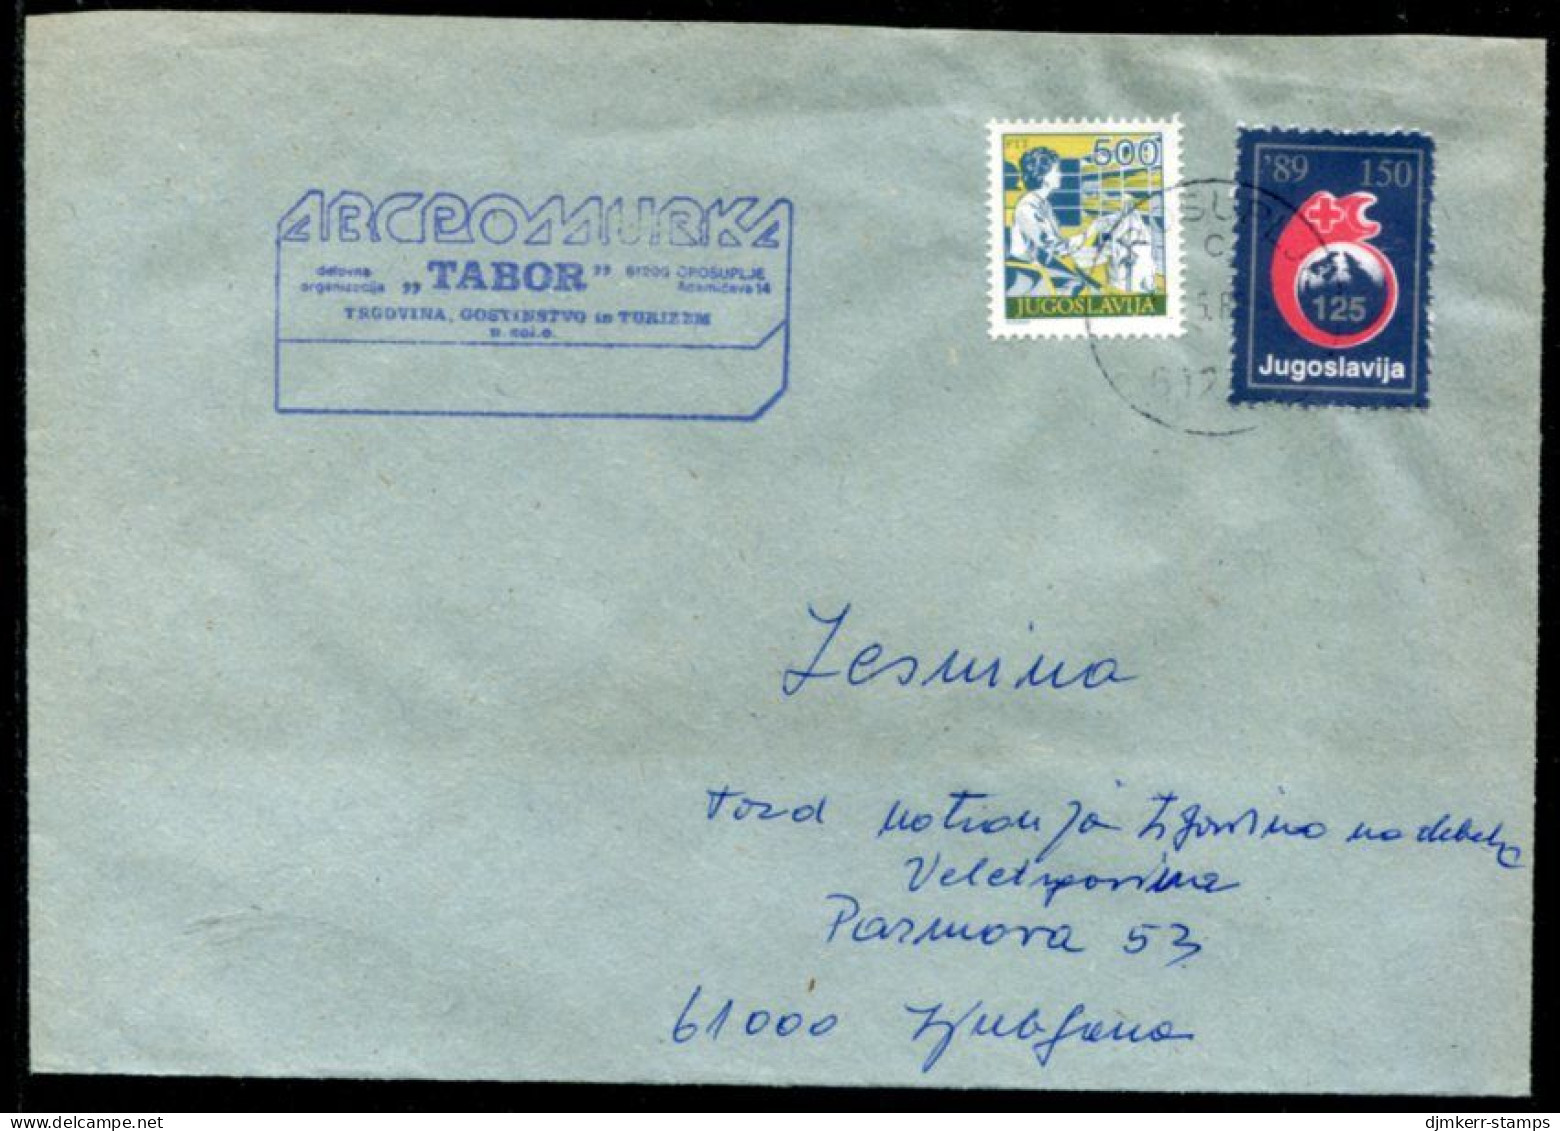 YUGOSLAVIA 1989 Commercial Cover With Red Cross Week 150 D Tax.  Michel ZZM 169 - Beneficiencia (Sellos De)